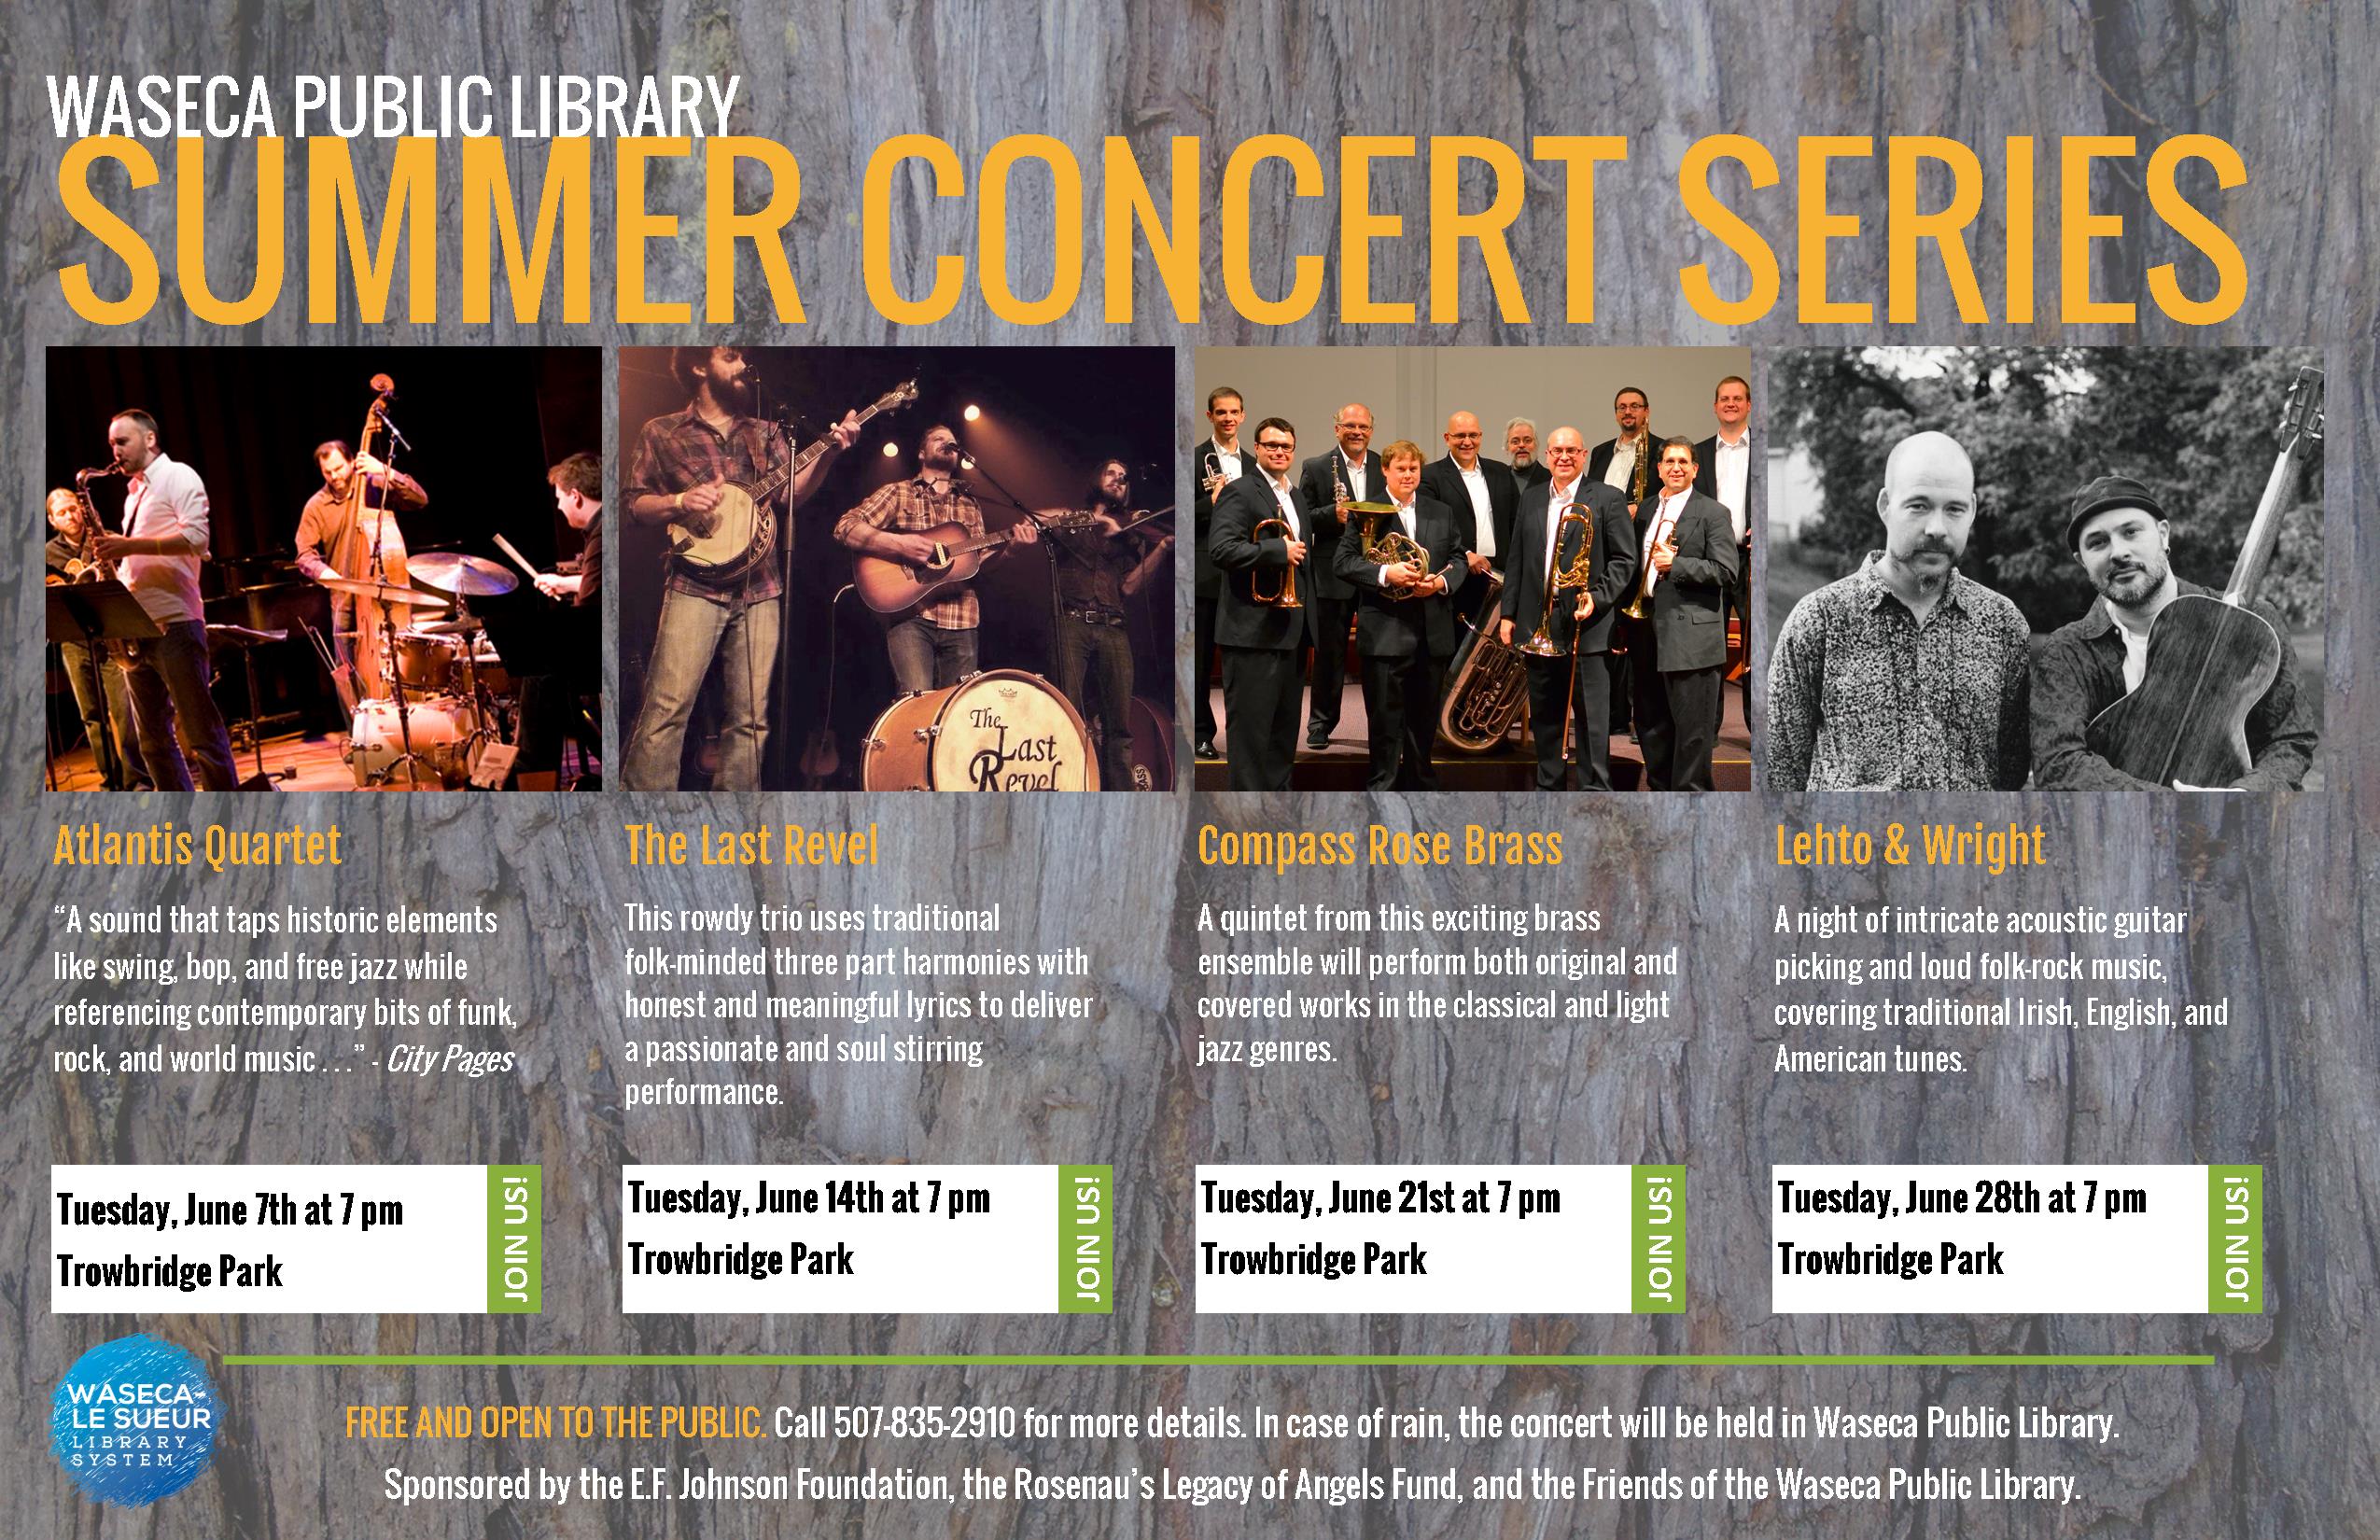 Announcing Waseca Public Library’s 2016 Summer Concert Series!